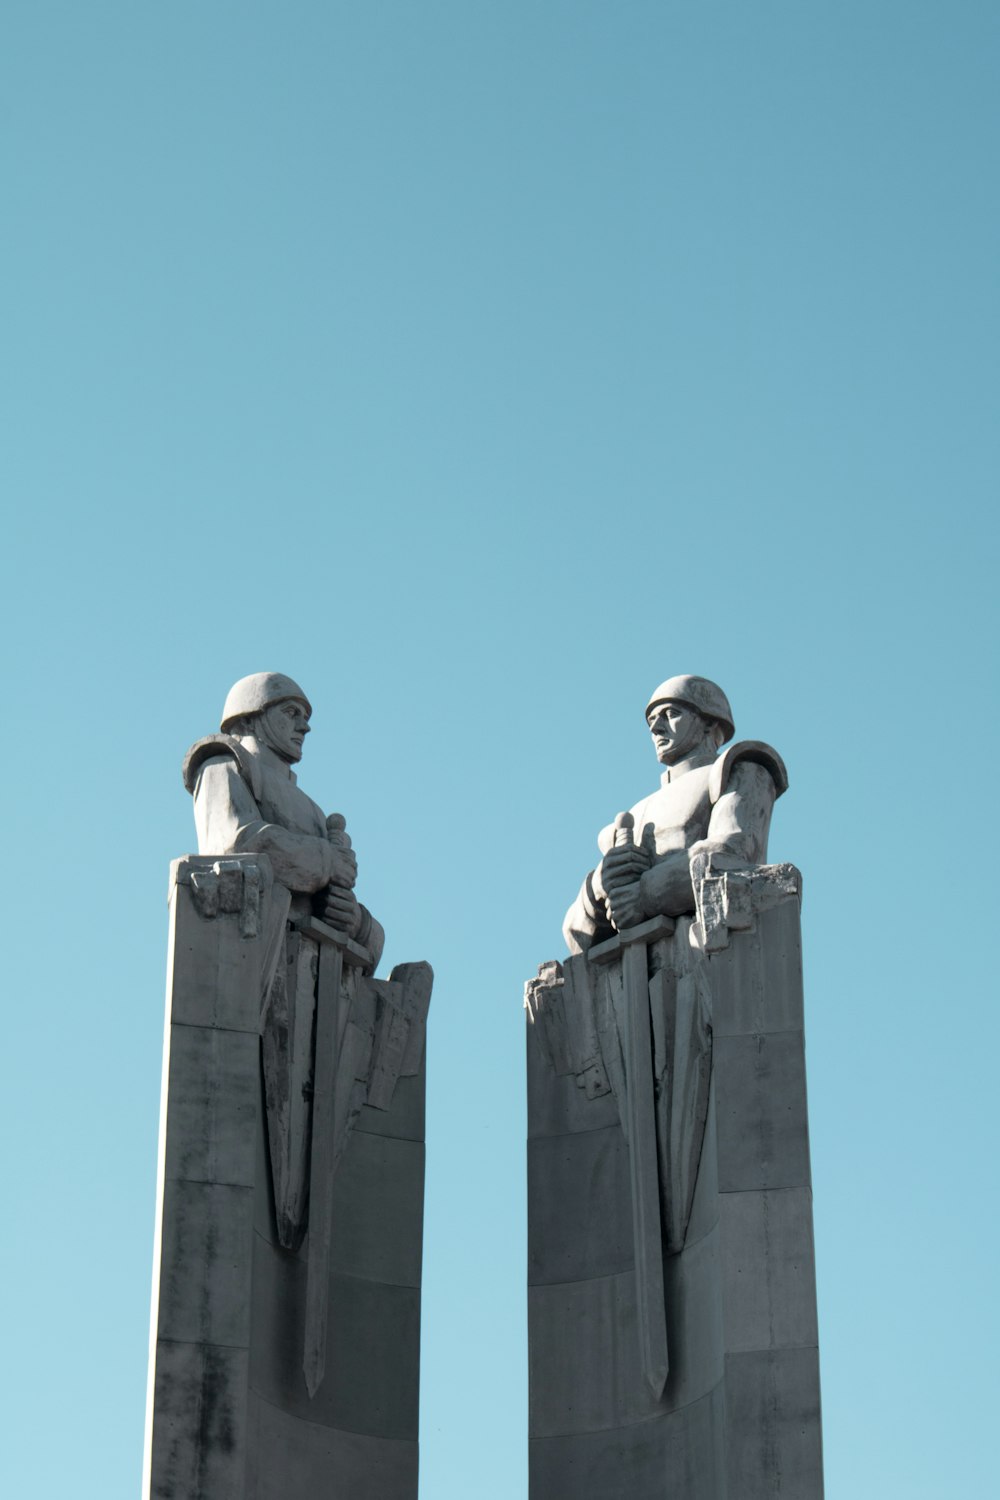 two man themed statues under blue sky